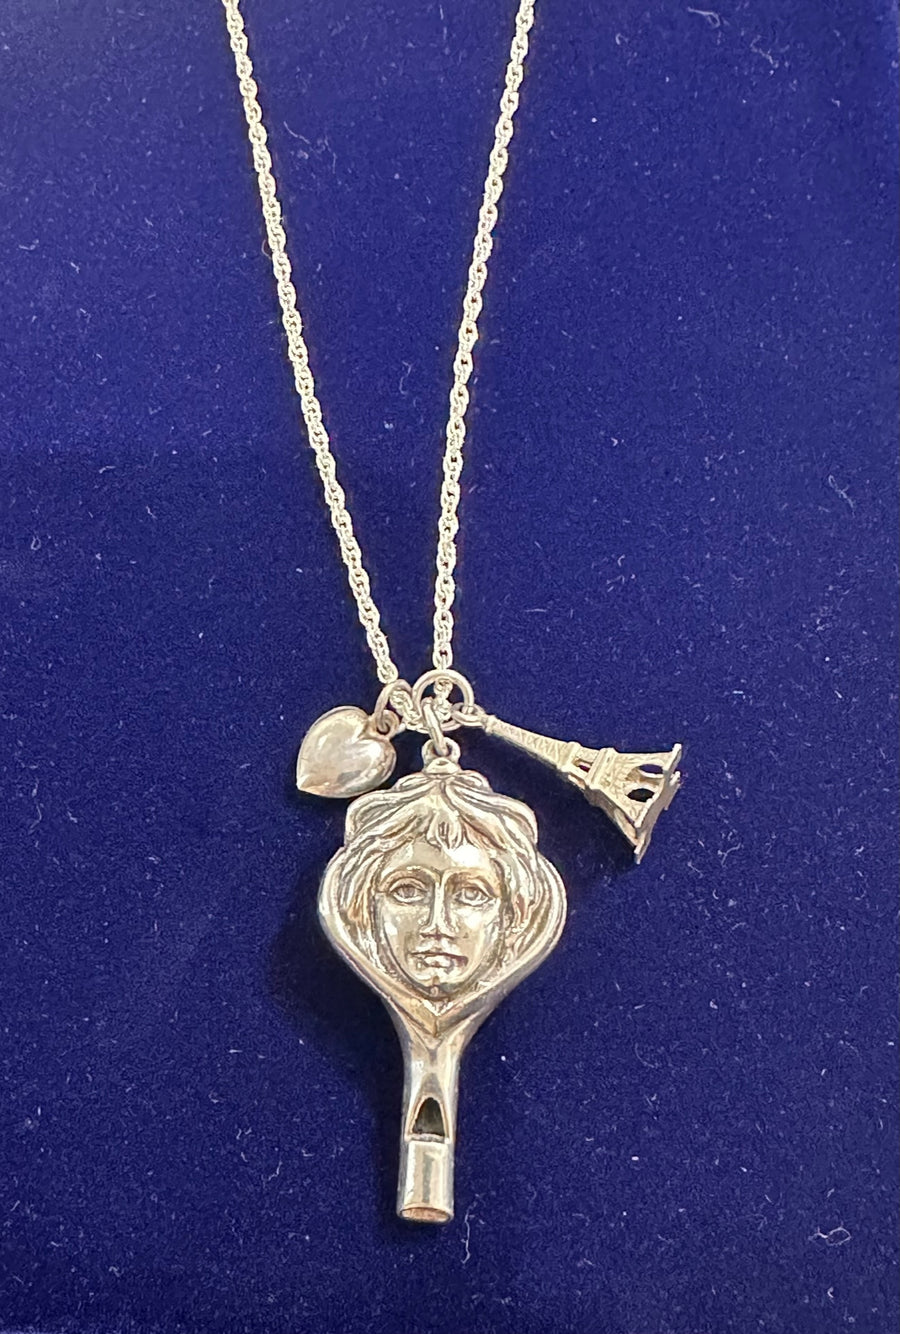 Art Nouveau Whistling Woman, Heart & Eiffel Tower Necklace in Sterling Silver. Modern 24" Rope Chain